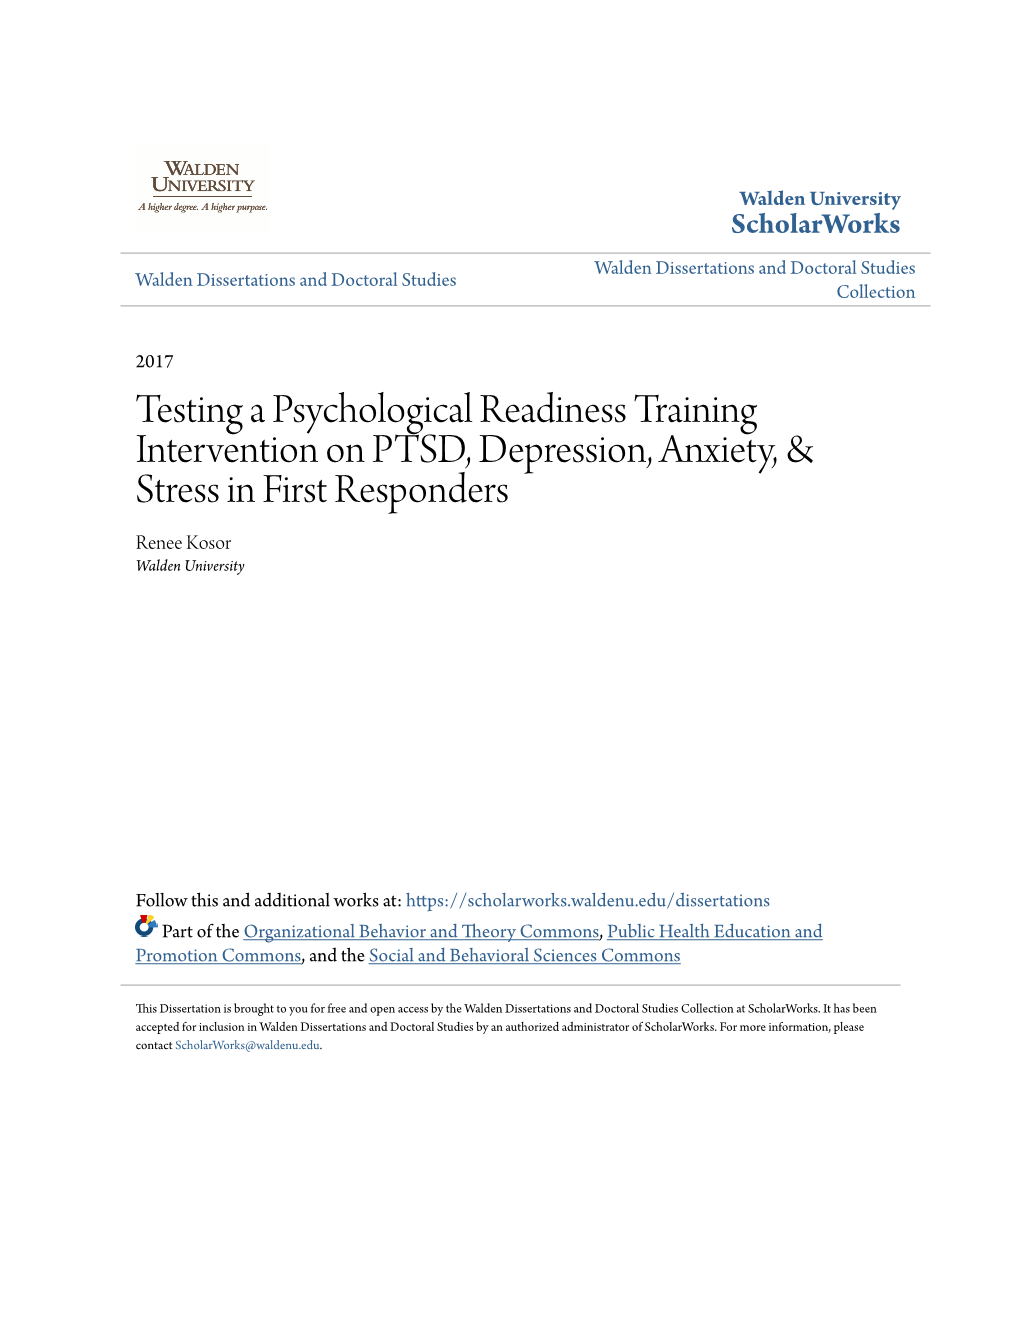 Testing a Psychological Readiness Training Intervention on PTSD, Depression, Anxiety, & Stress in First Responders